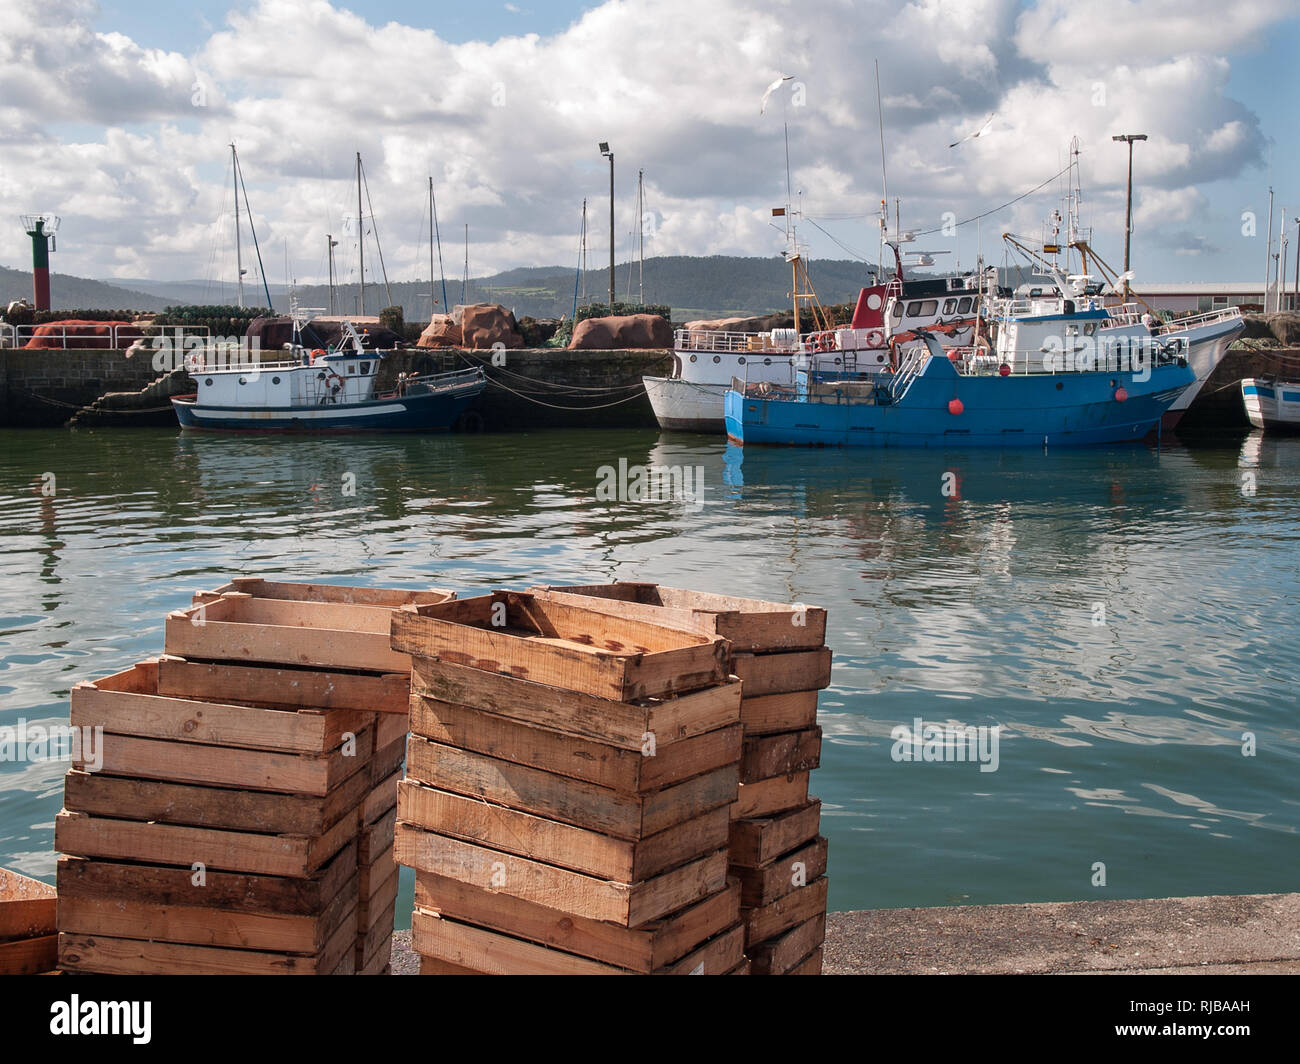 Wooden fishing crates stacked and fishing harbor. Atlantic coast harbor landscape. Fishing industry concept Stock Photo